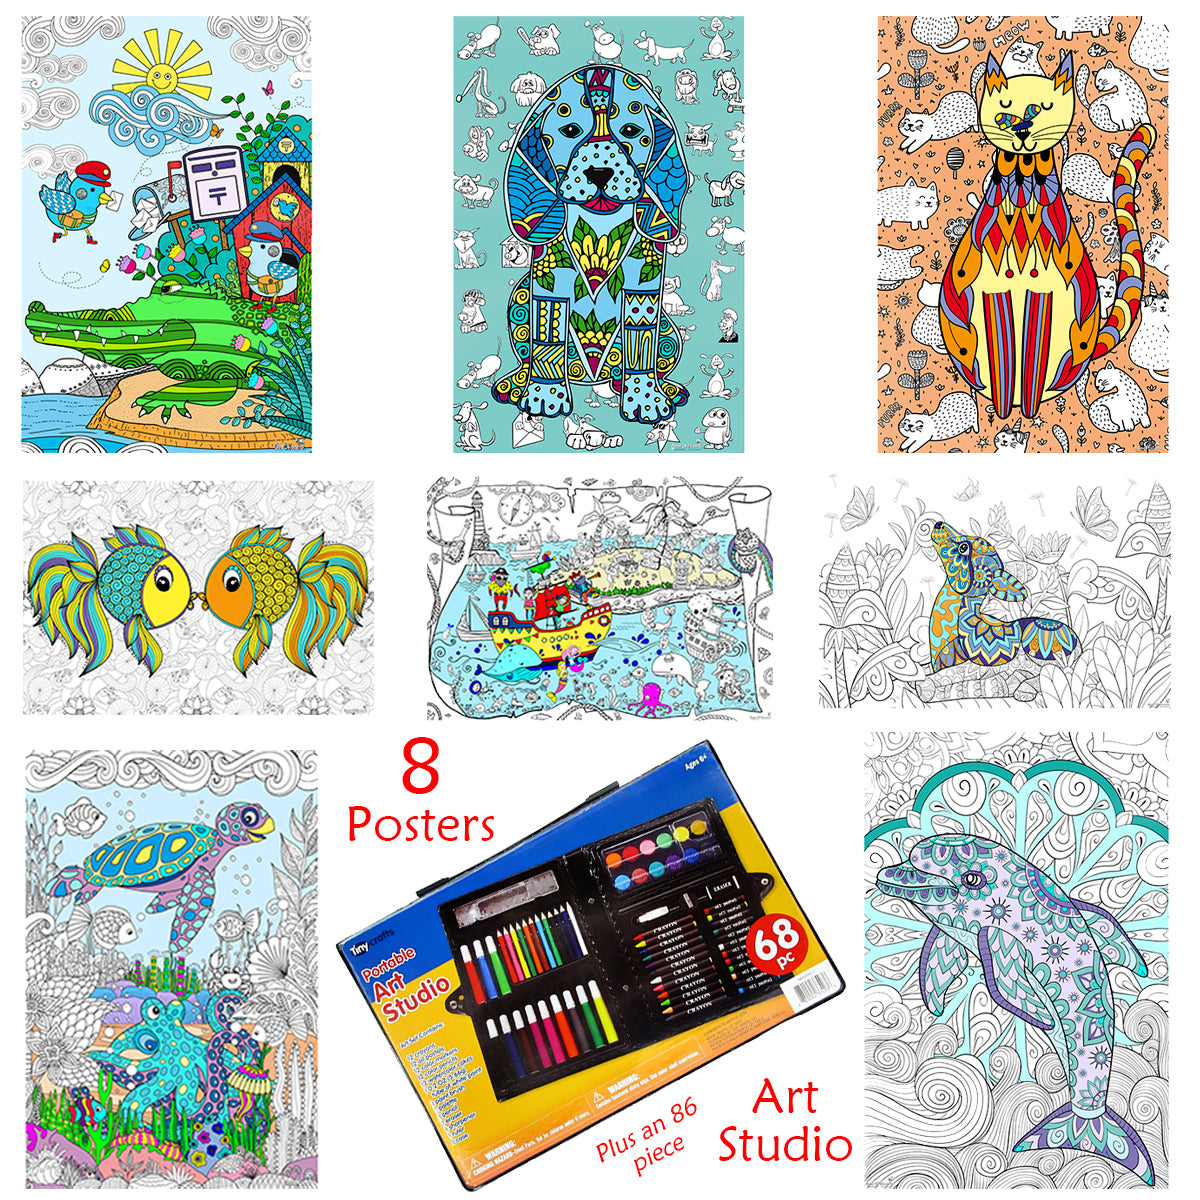 Folded Poster Bundle For Kids & Teens - 8 Posters and 68 Piece Coloring Kit